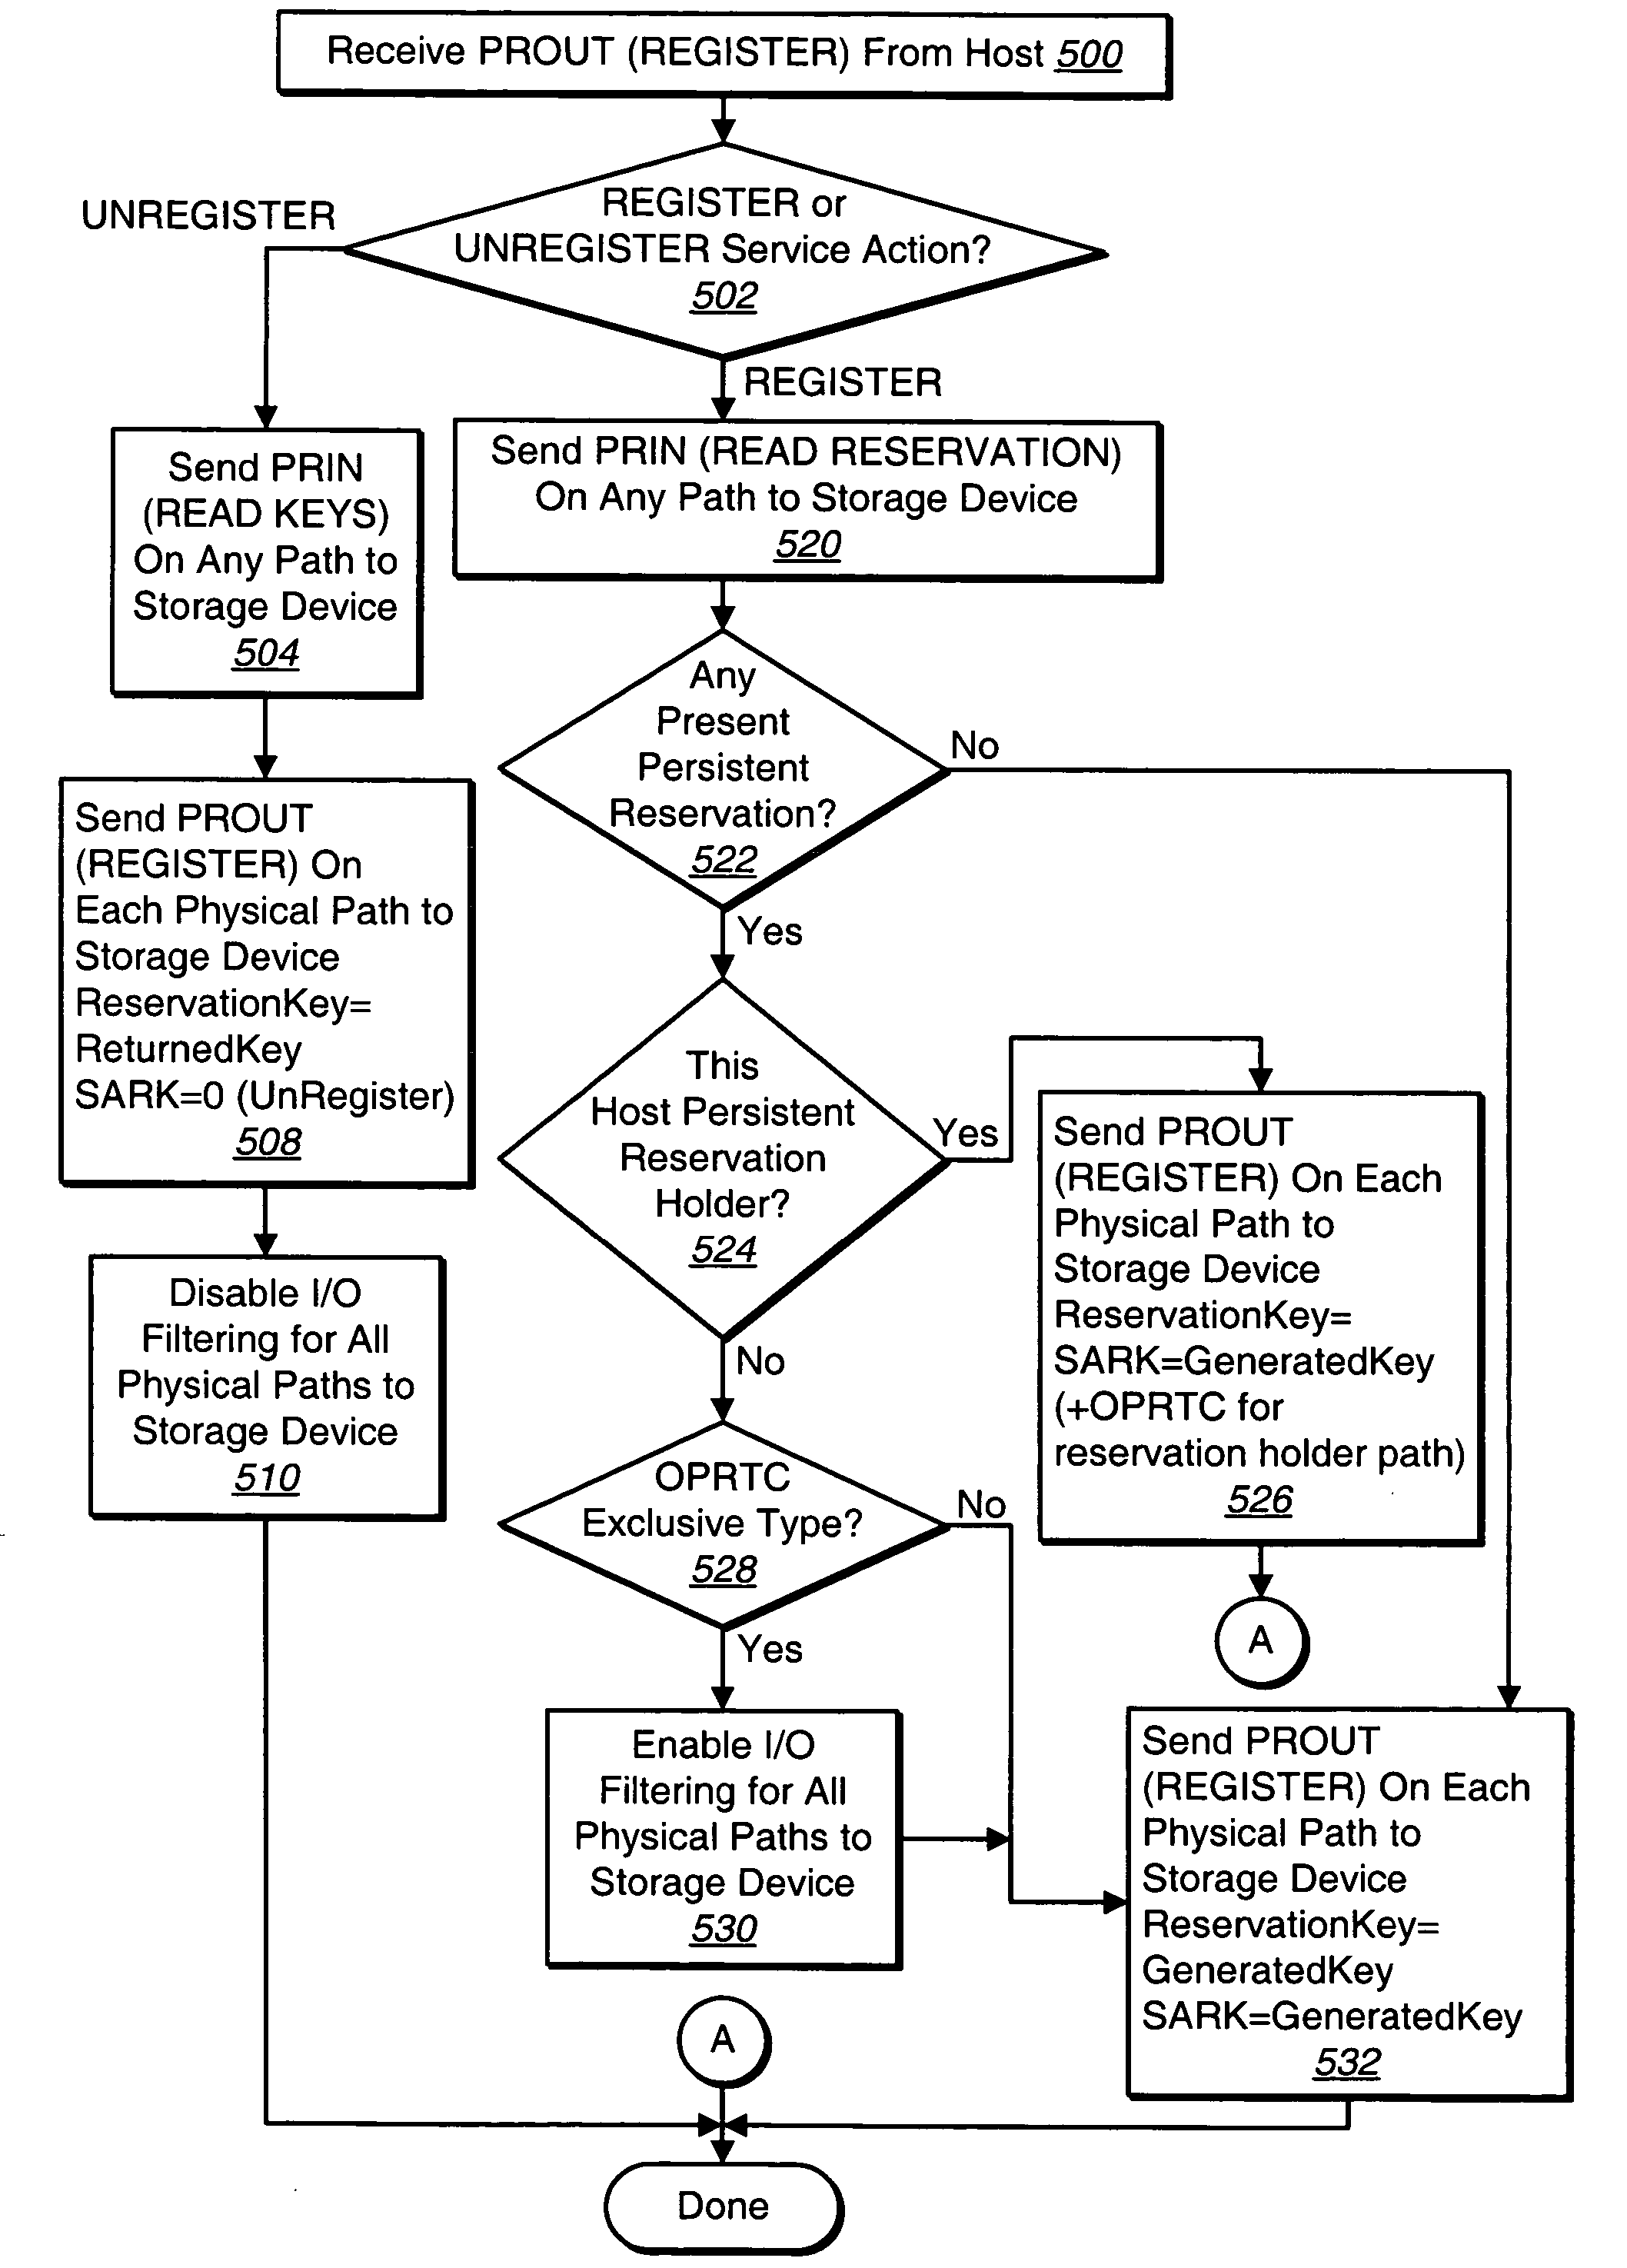 Methods and structure for supporting persistent reservations in a multiple-path storage environment